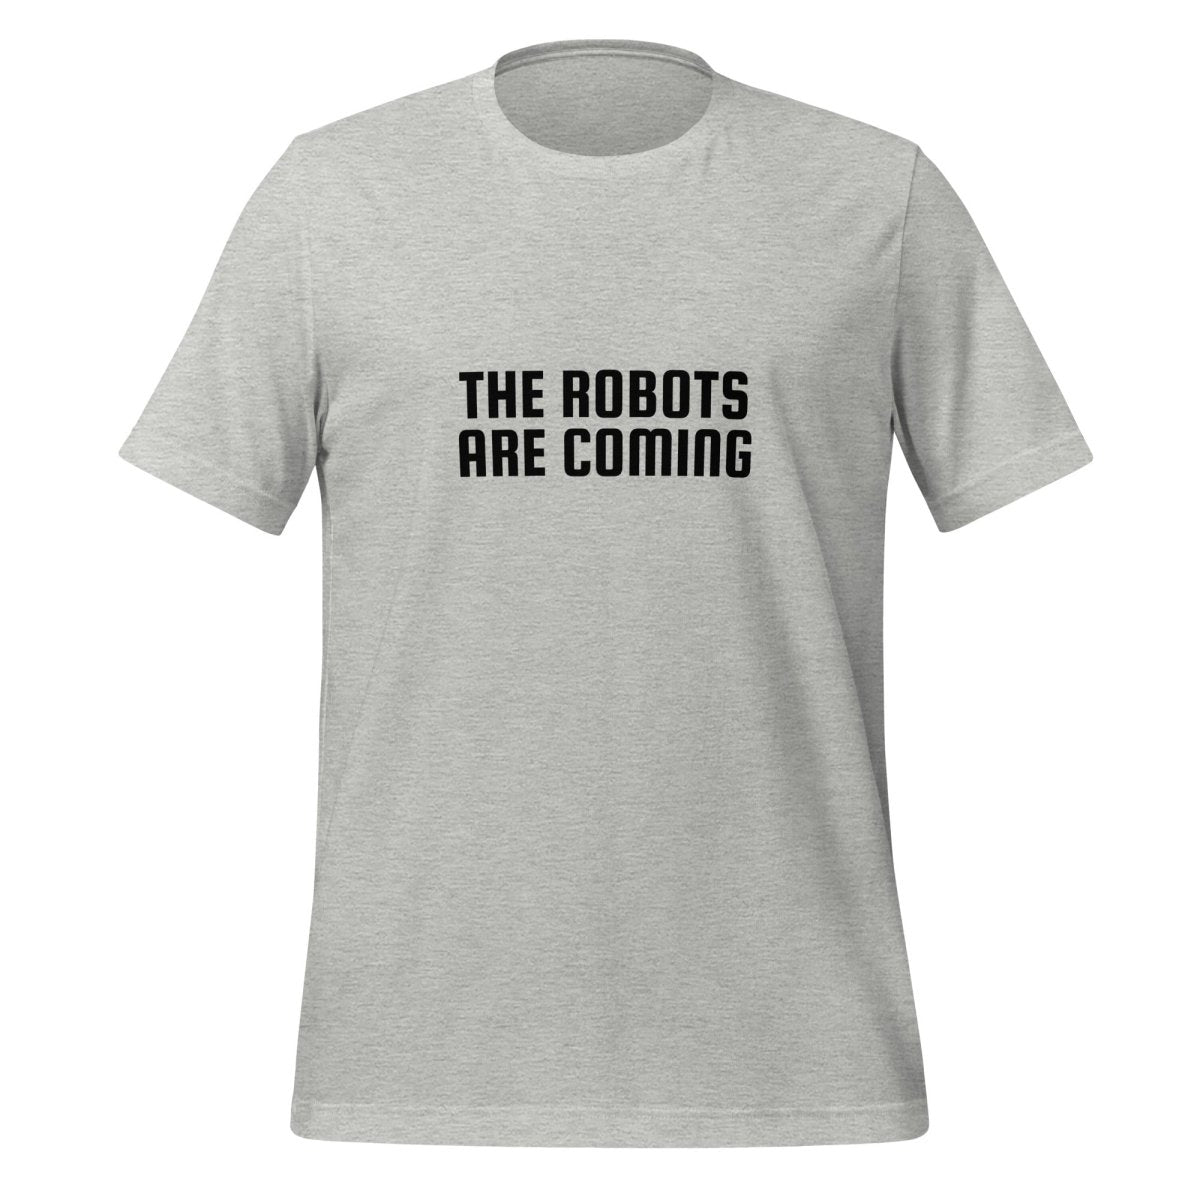 The Robots Are Coming in Black T - Shirt 2 (unisex) - Athletic Heather - AI Store